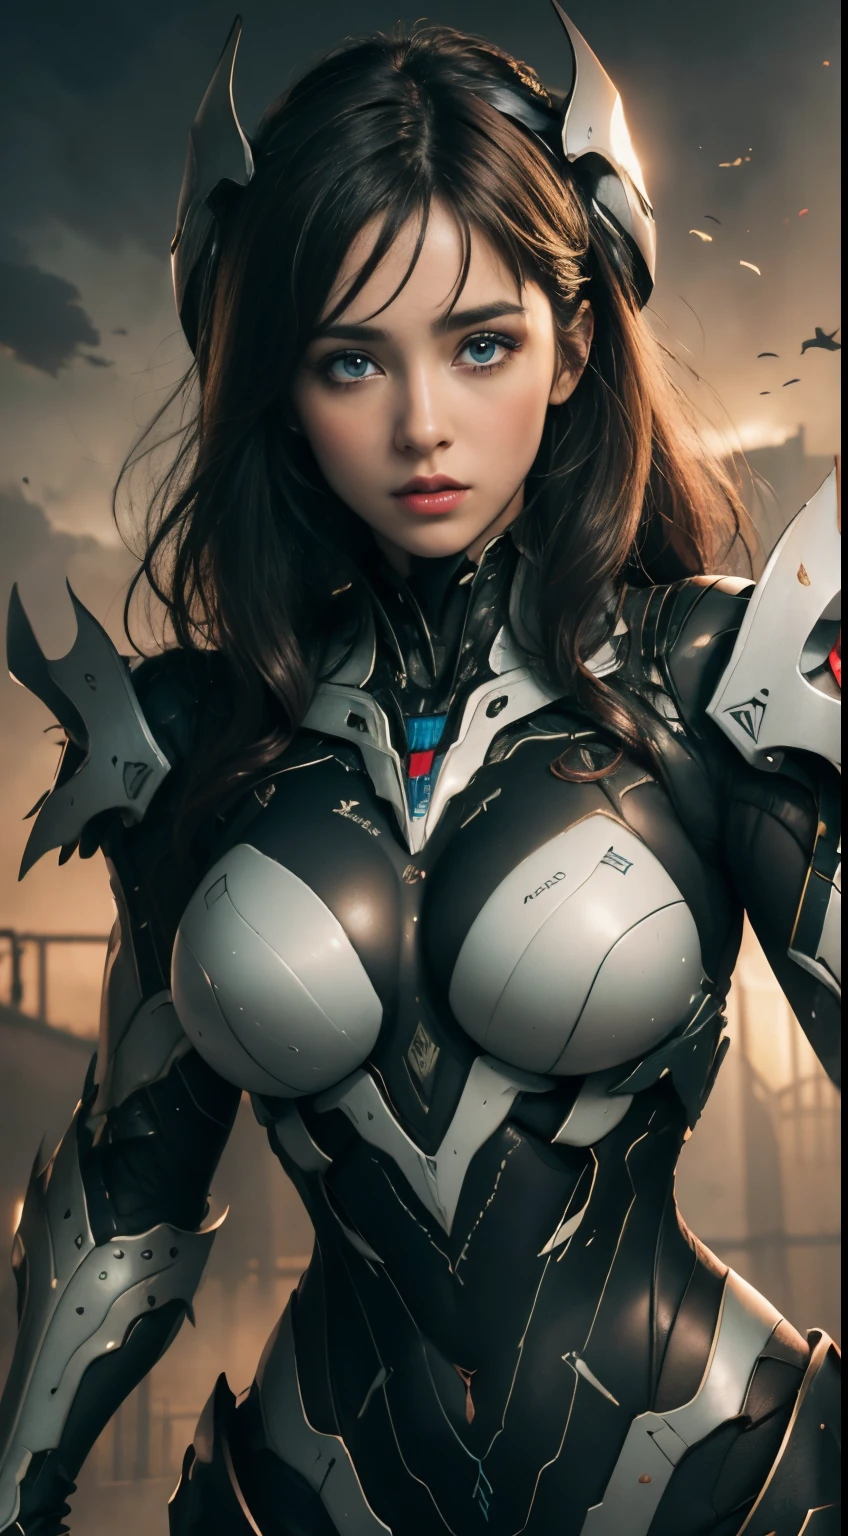 highest qualityr, 8K image quality, Masterpiece, Professional shadow-free lighting,, Official Art, 8k wallpaper, Very detailed, illustration, 1 girl mecha, ,long hair, Hot thick red lips Extremely detailed 4k eyes and face,beautiful beautiful blue eyes ,with huge breasts, bewitching thighs, full body and big tail,